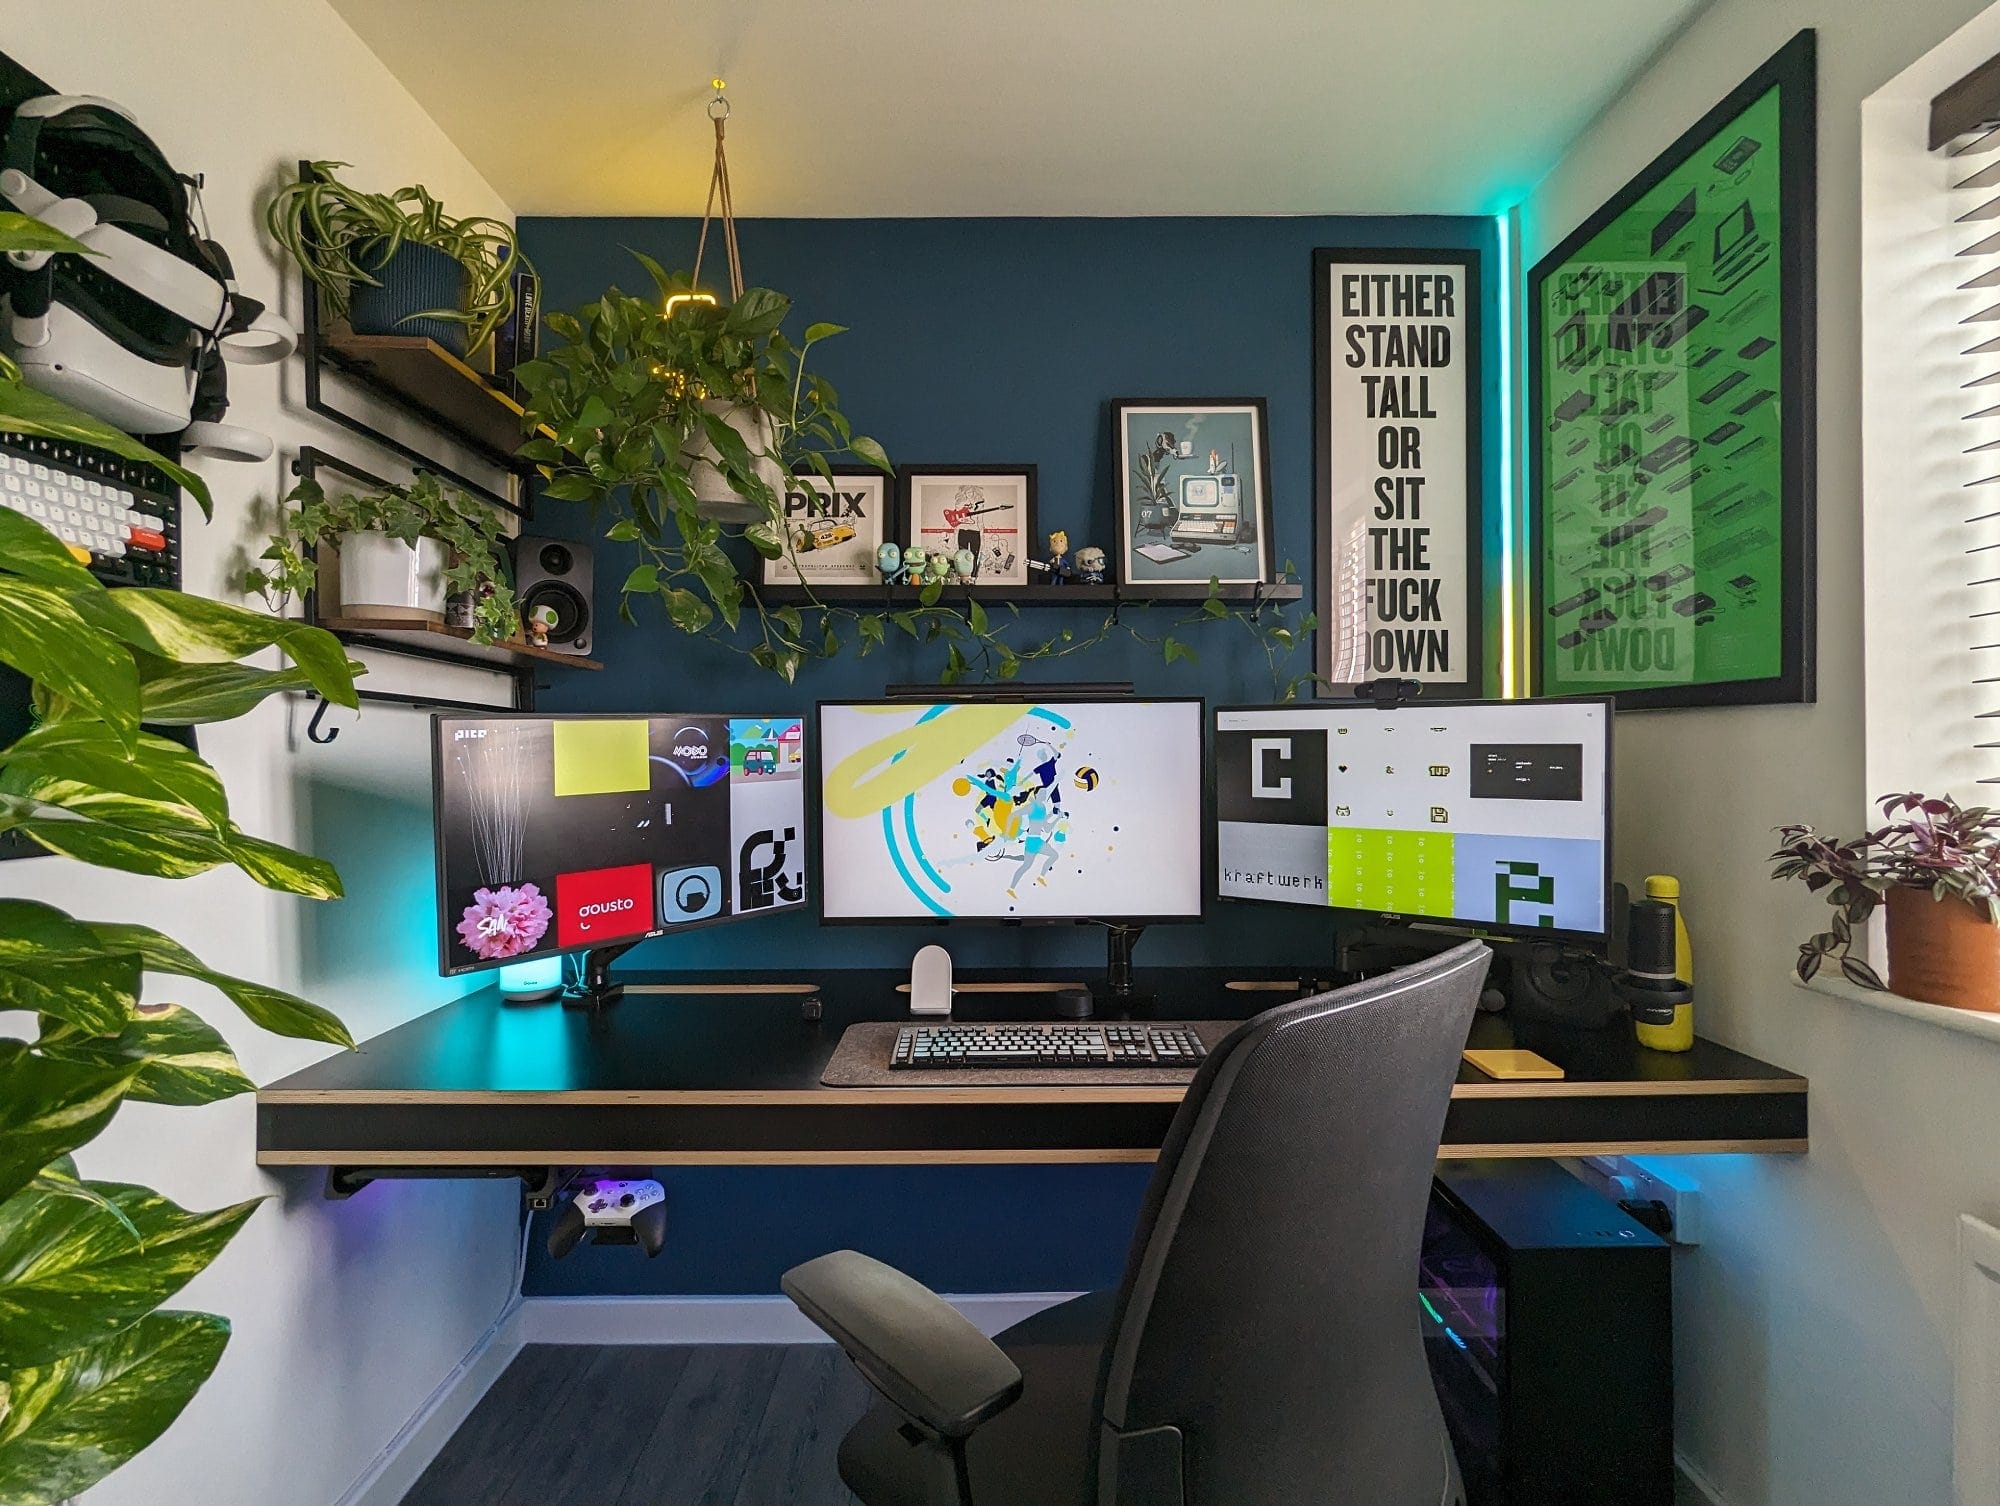 A modern home office setup featuring a sleek desk with a triple-monitor display, surrounded by lush green plants, framed artwork, motivational posters, and ambient LED lighting